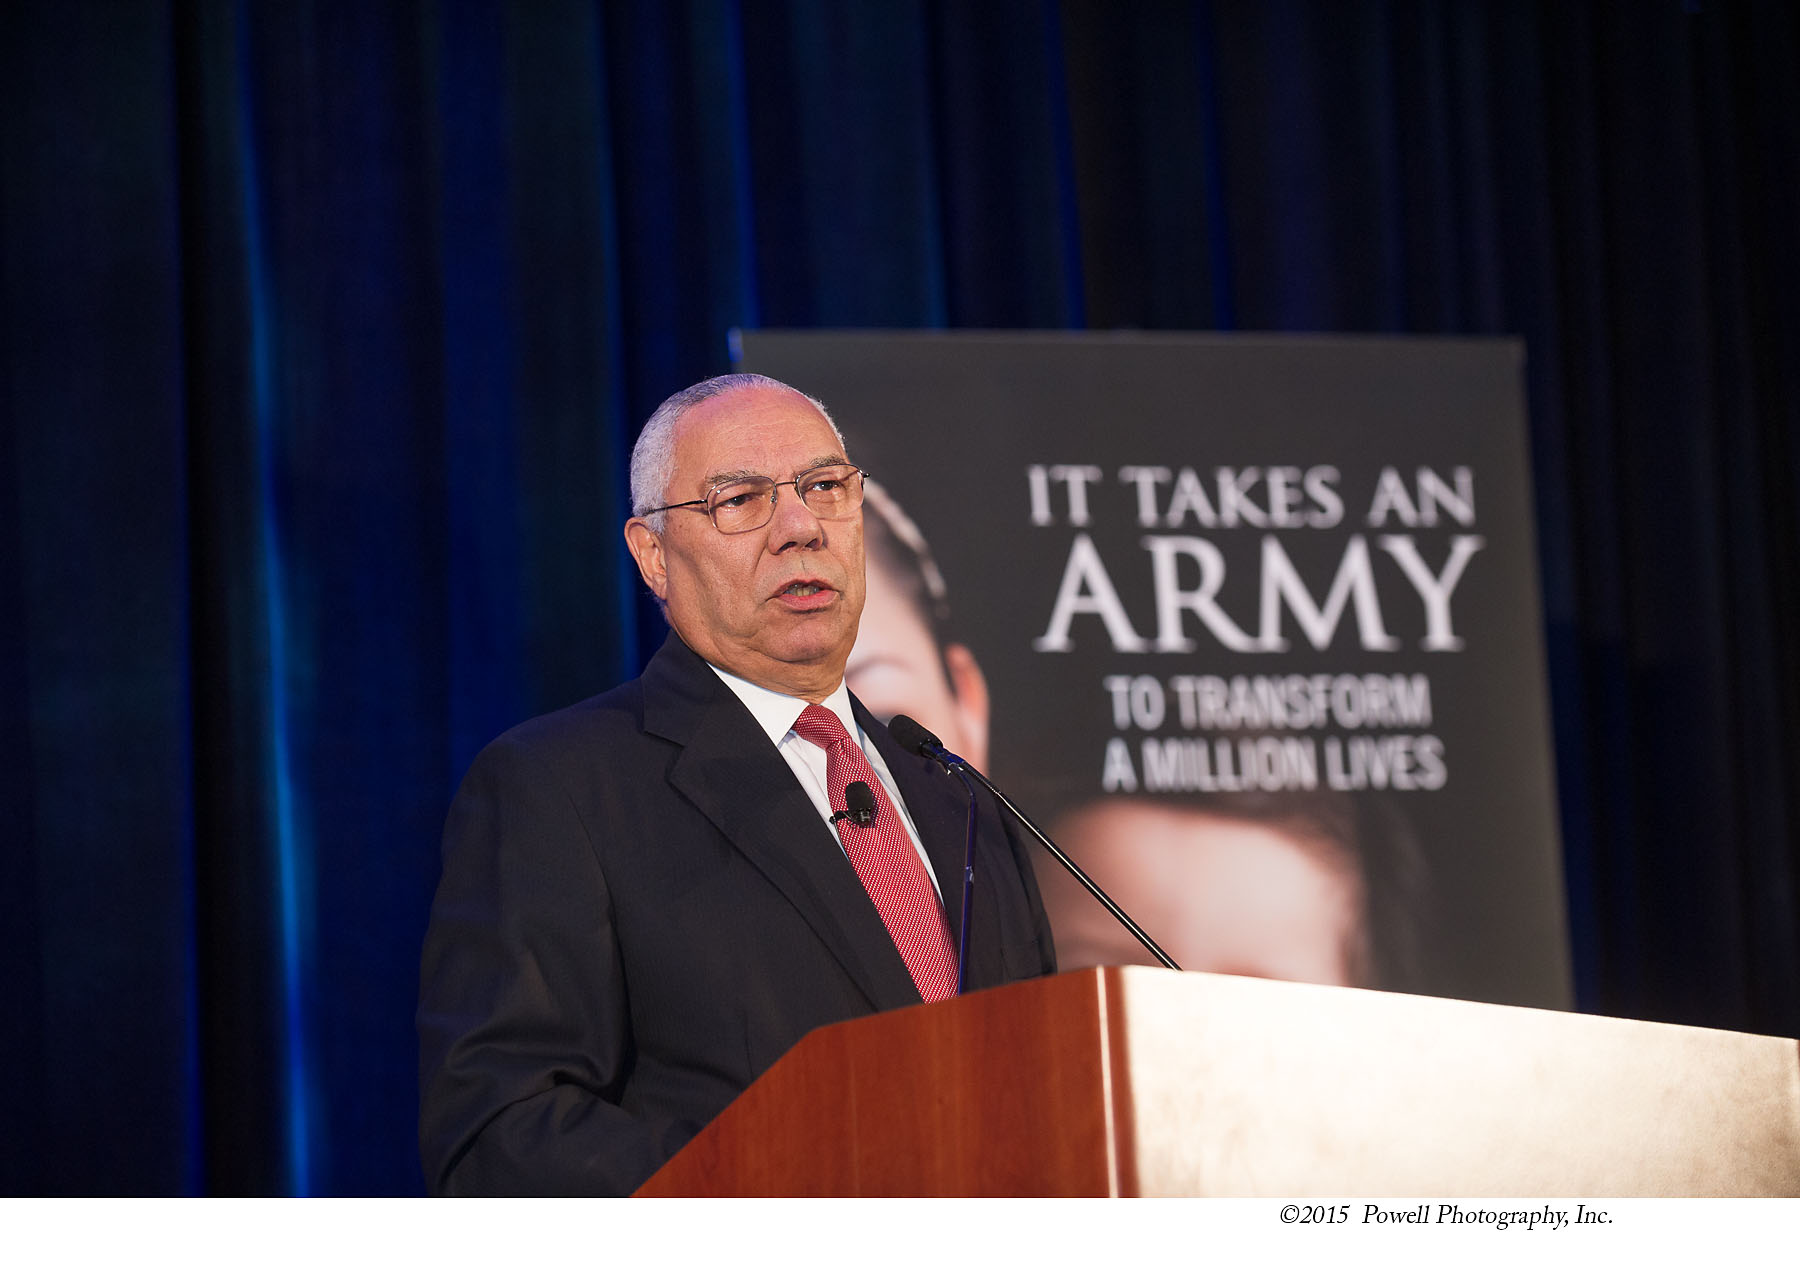 General Colin Powell Addressing the Salvation Army audience celebrating its 150th anniversary in Chicago.